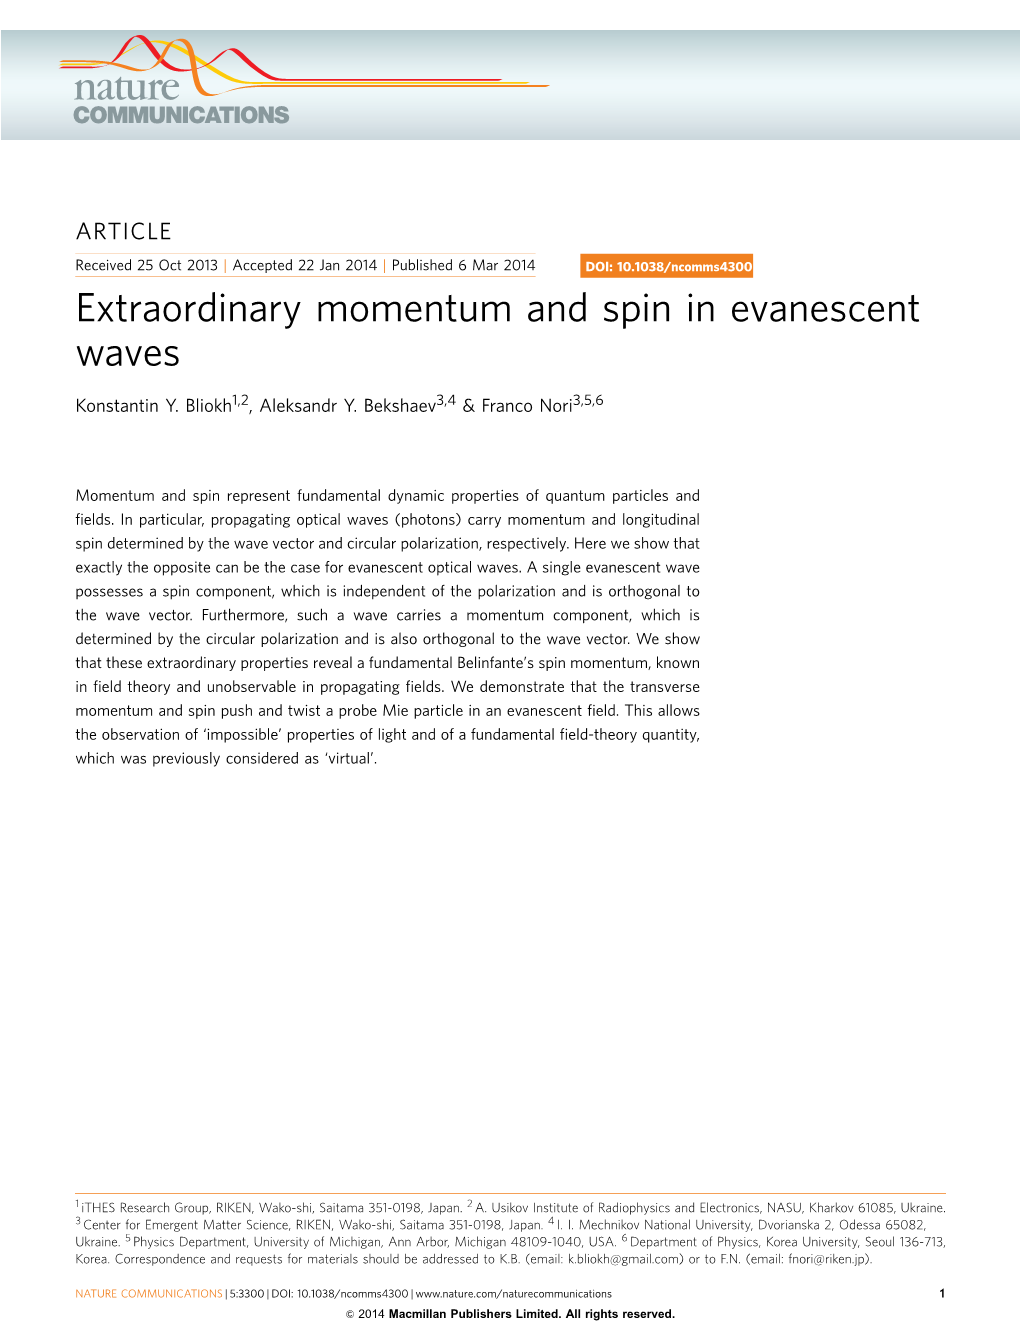 Extraordinary Momentum and Spin in Evanescent Waves